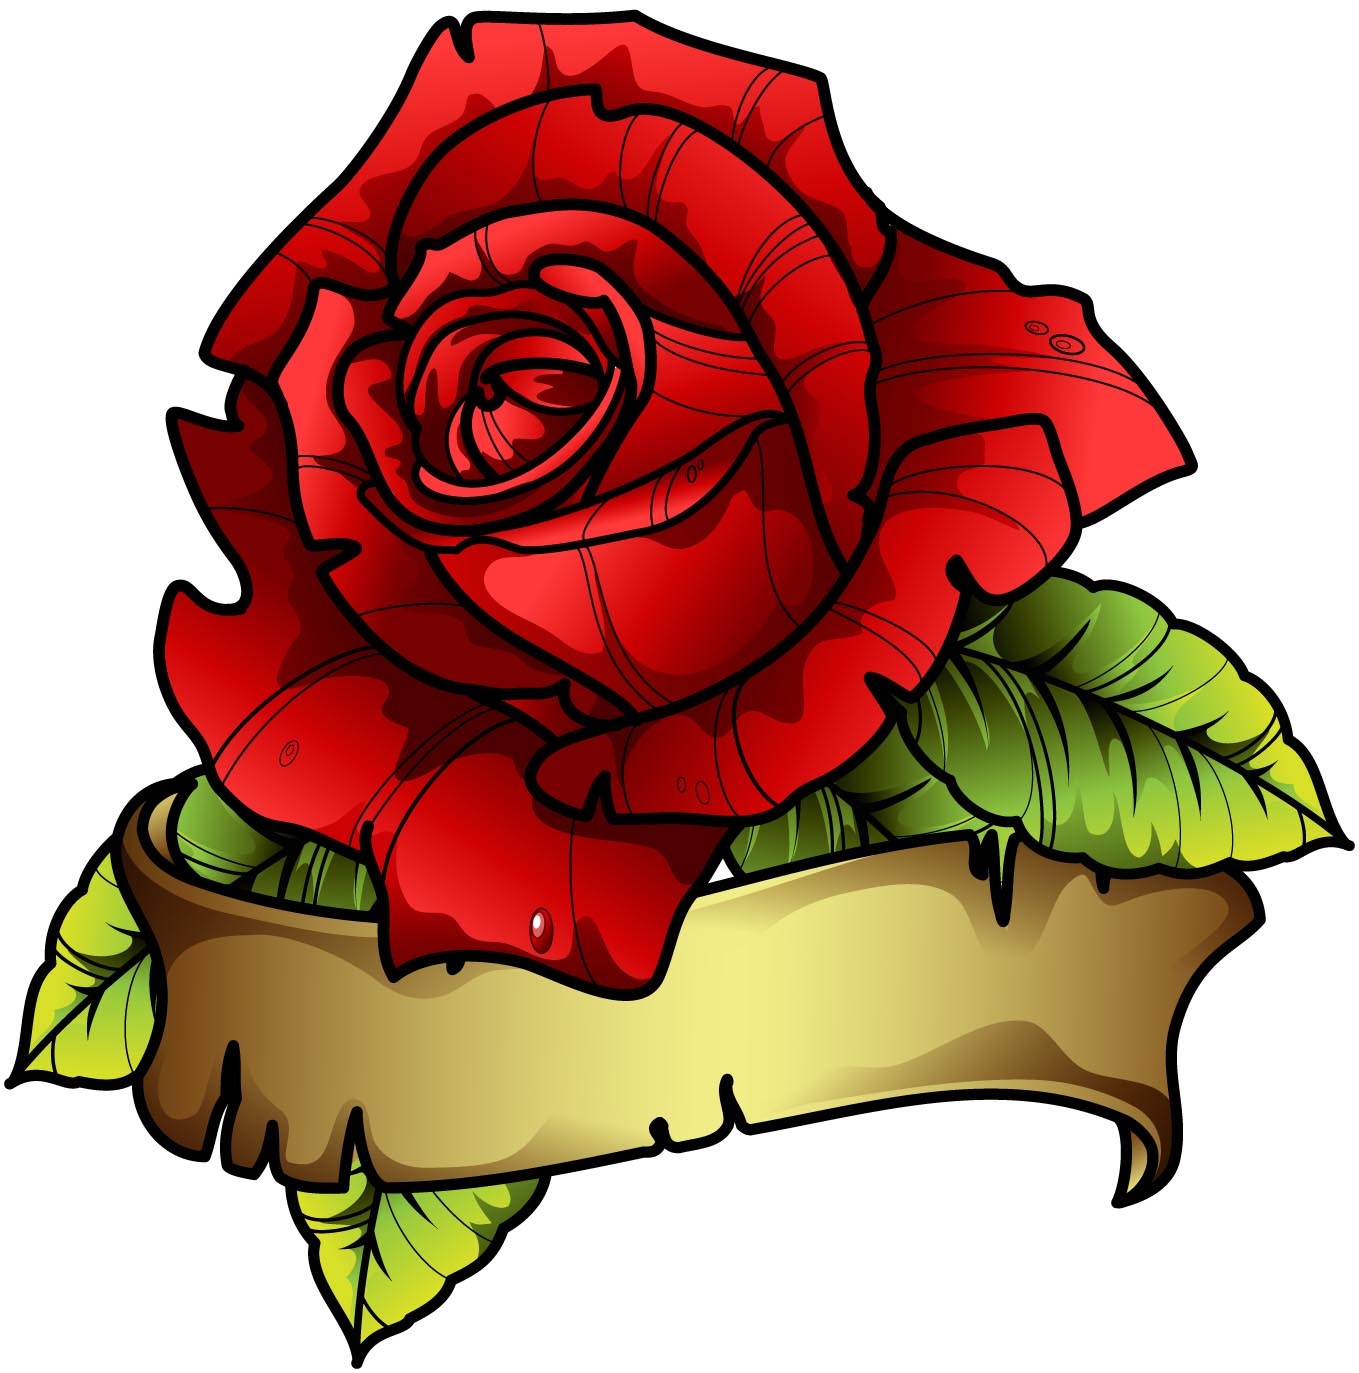 drawings of roses and banners